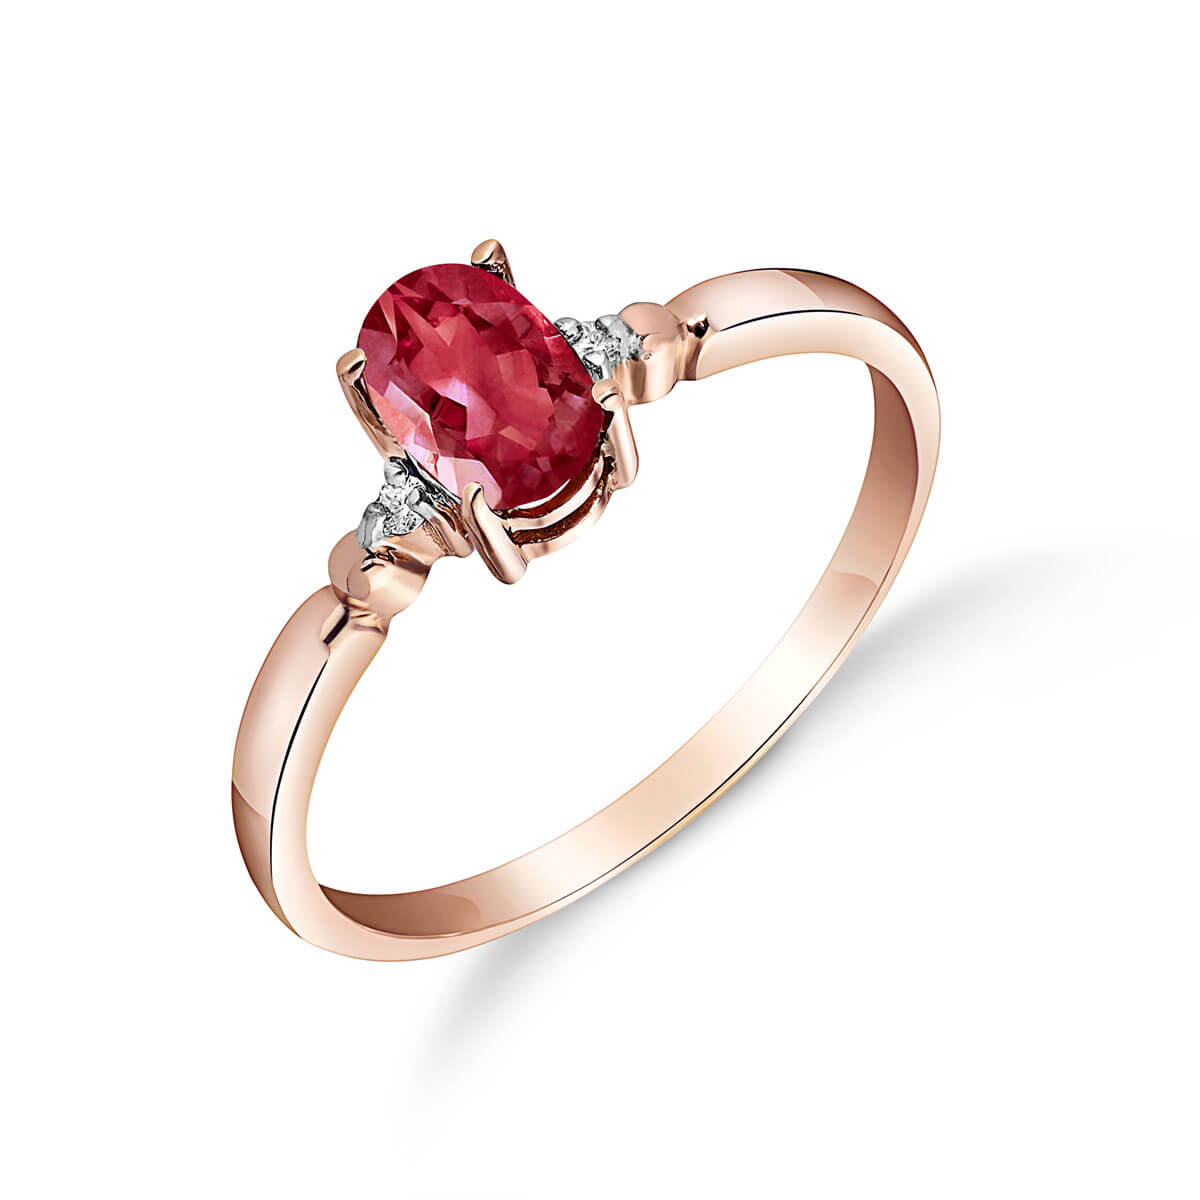 Ruby & Diamond Allure Ring in 9ct Rose Gold